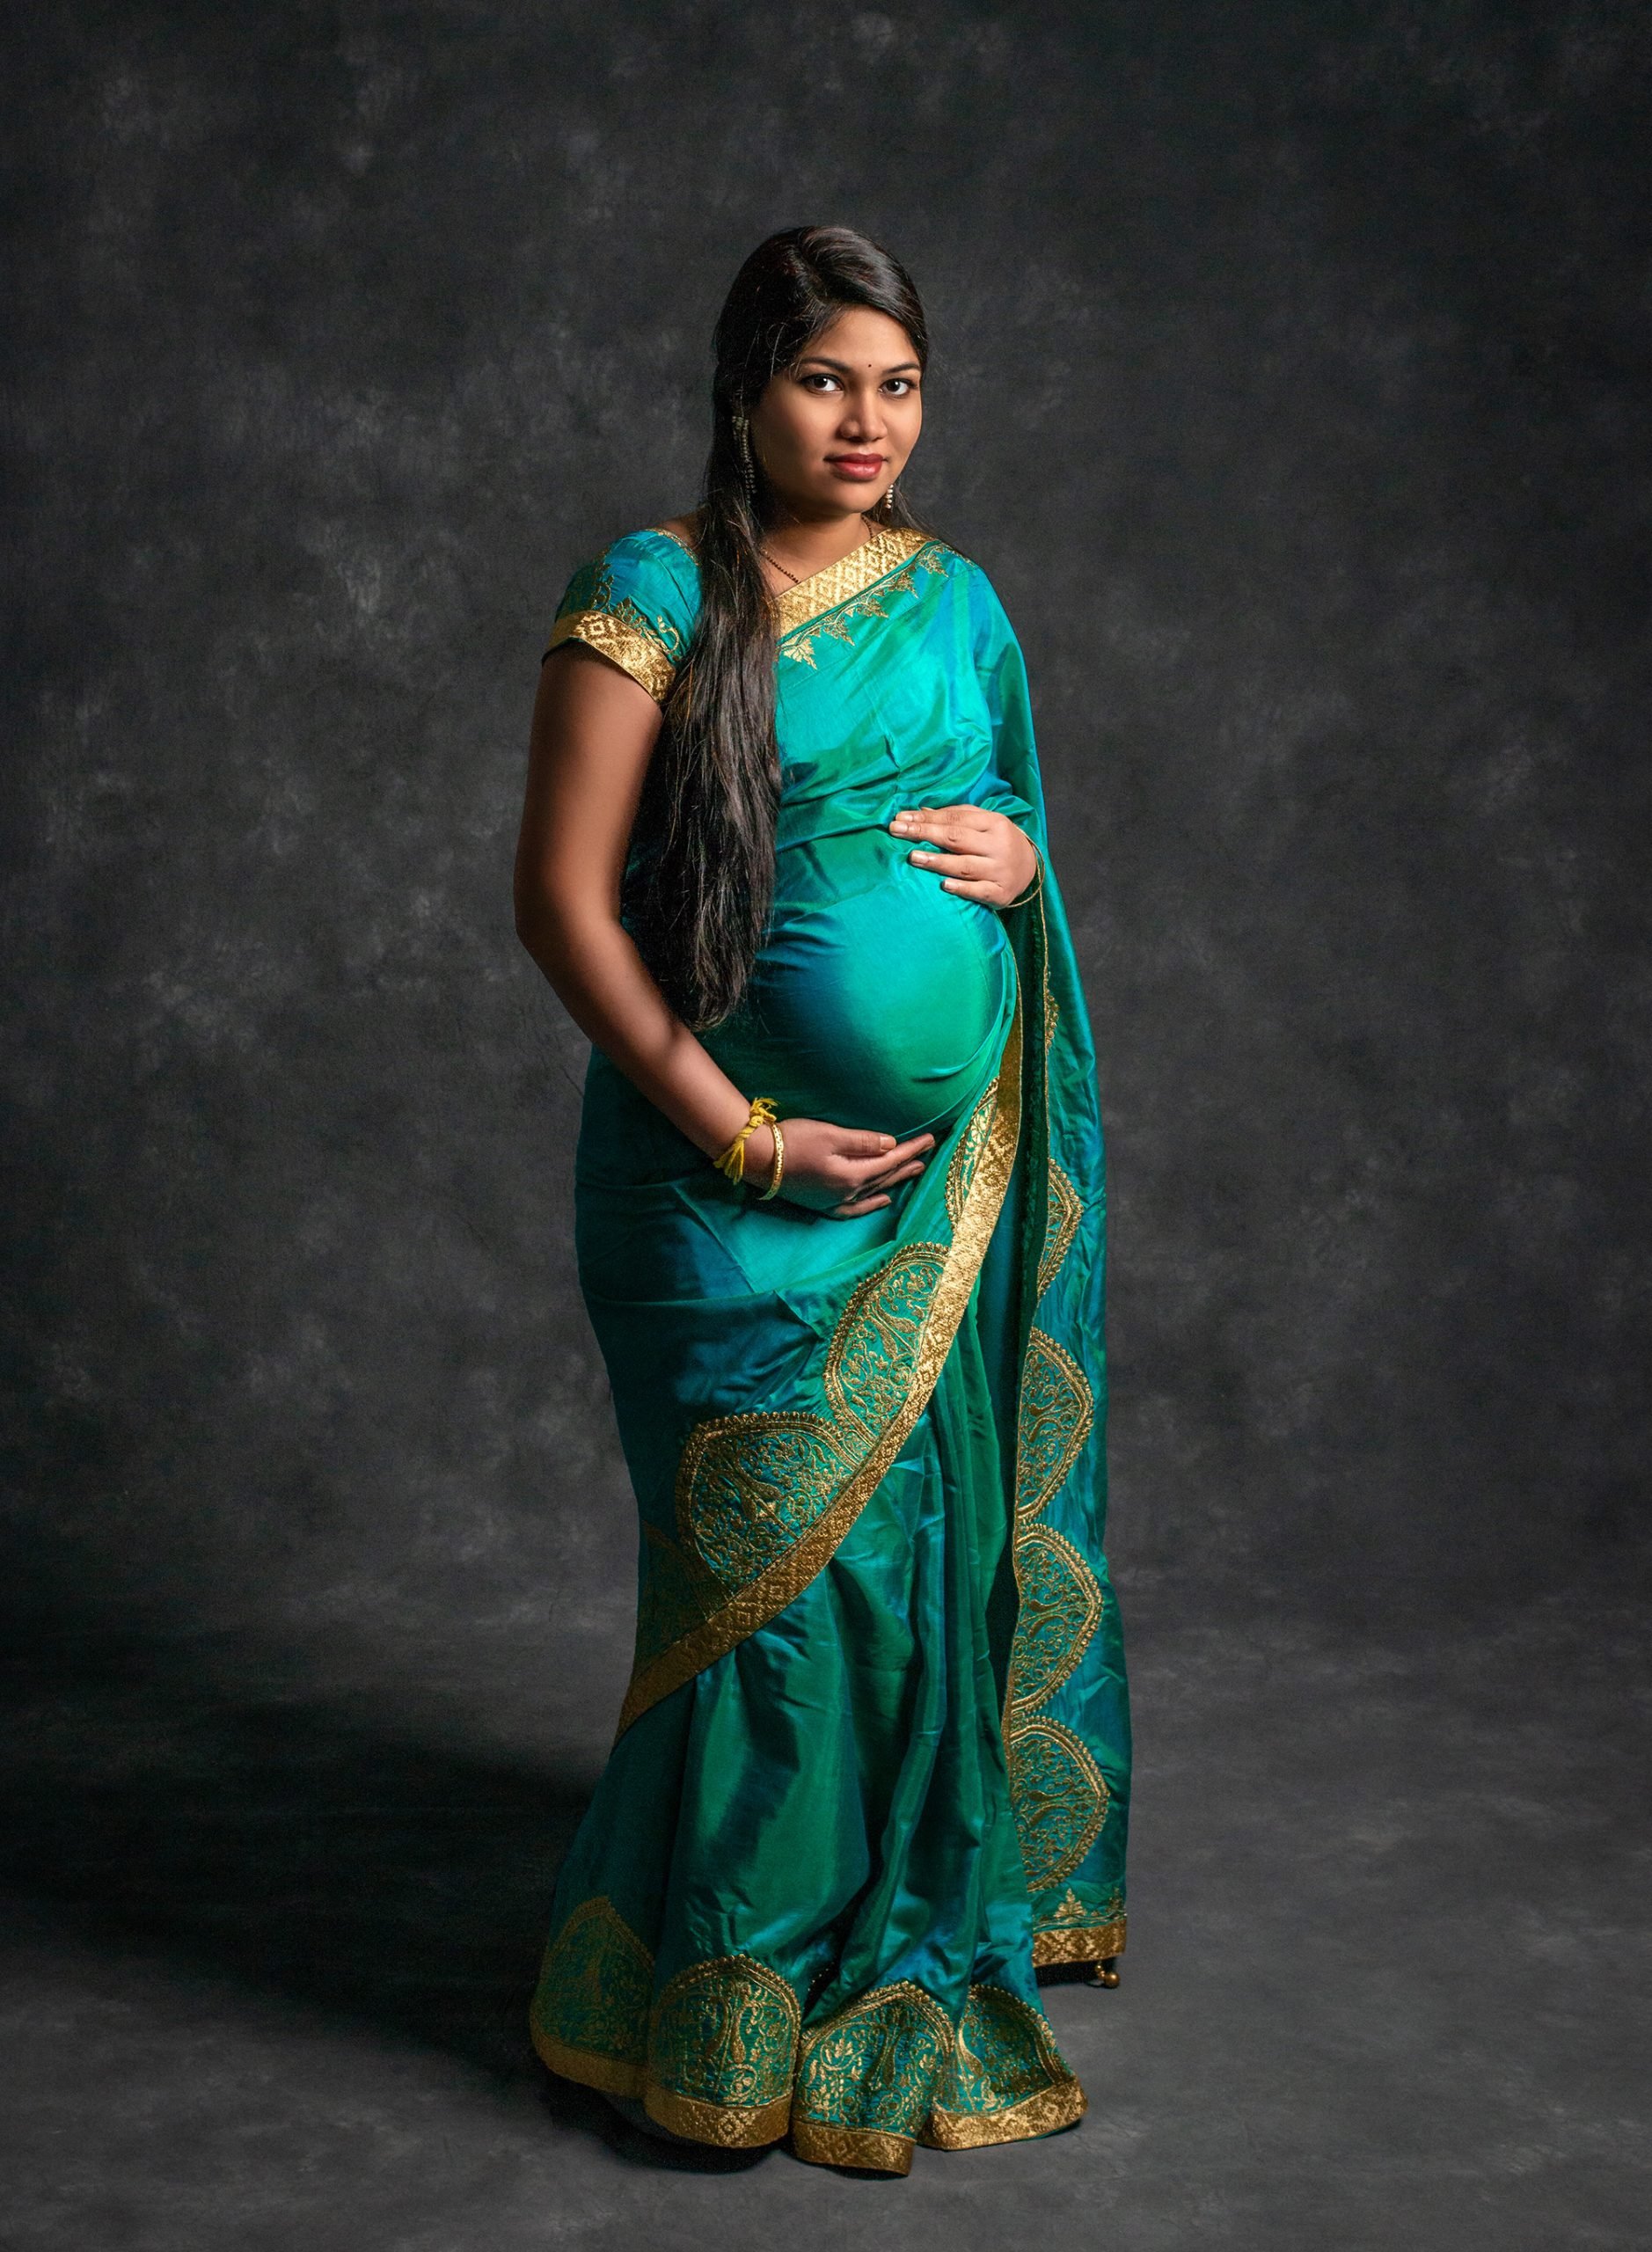 Traditional Indian Clothes Maternity Photos